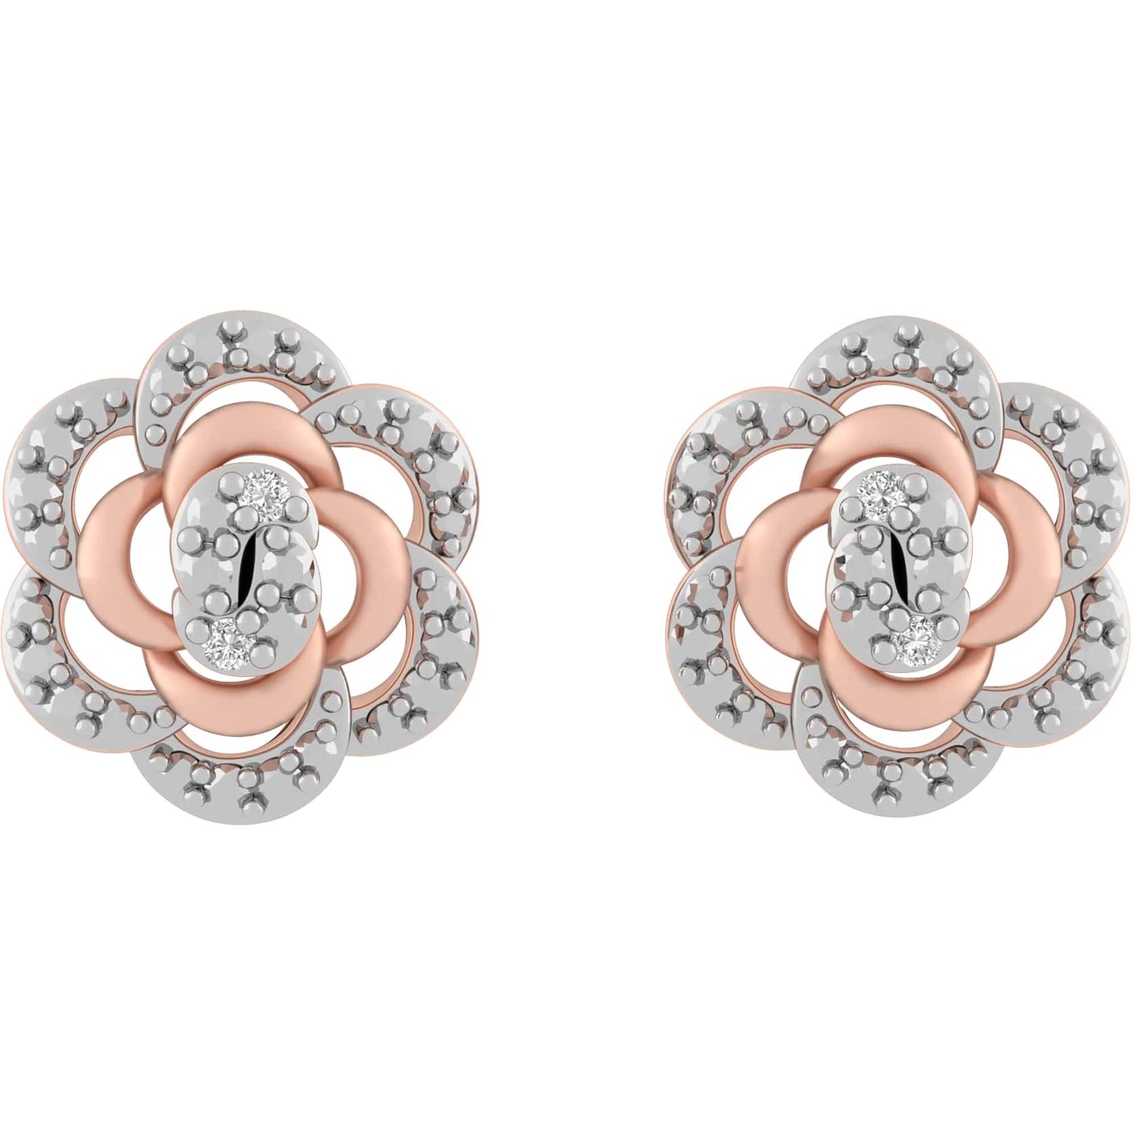 Sterling Silver 10K Rose Goldtone Diamond Accent Earrings and Pendant Flower Set - Image 4 of 6